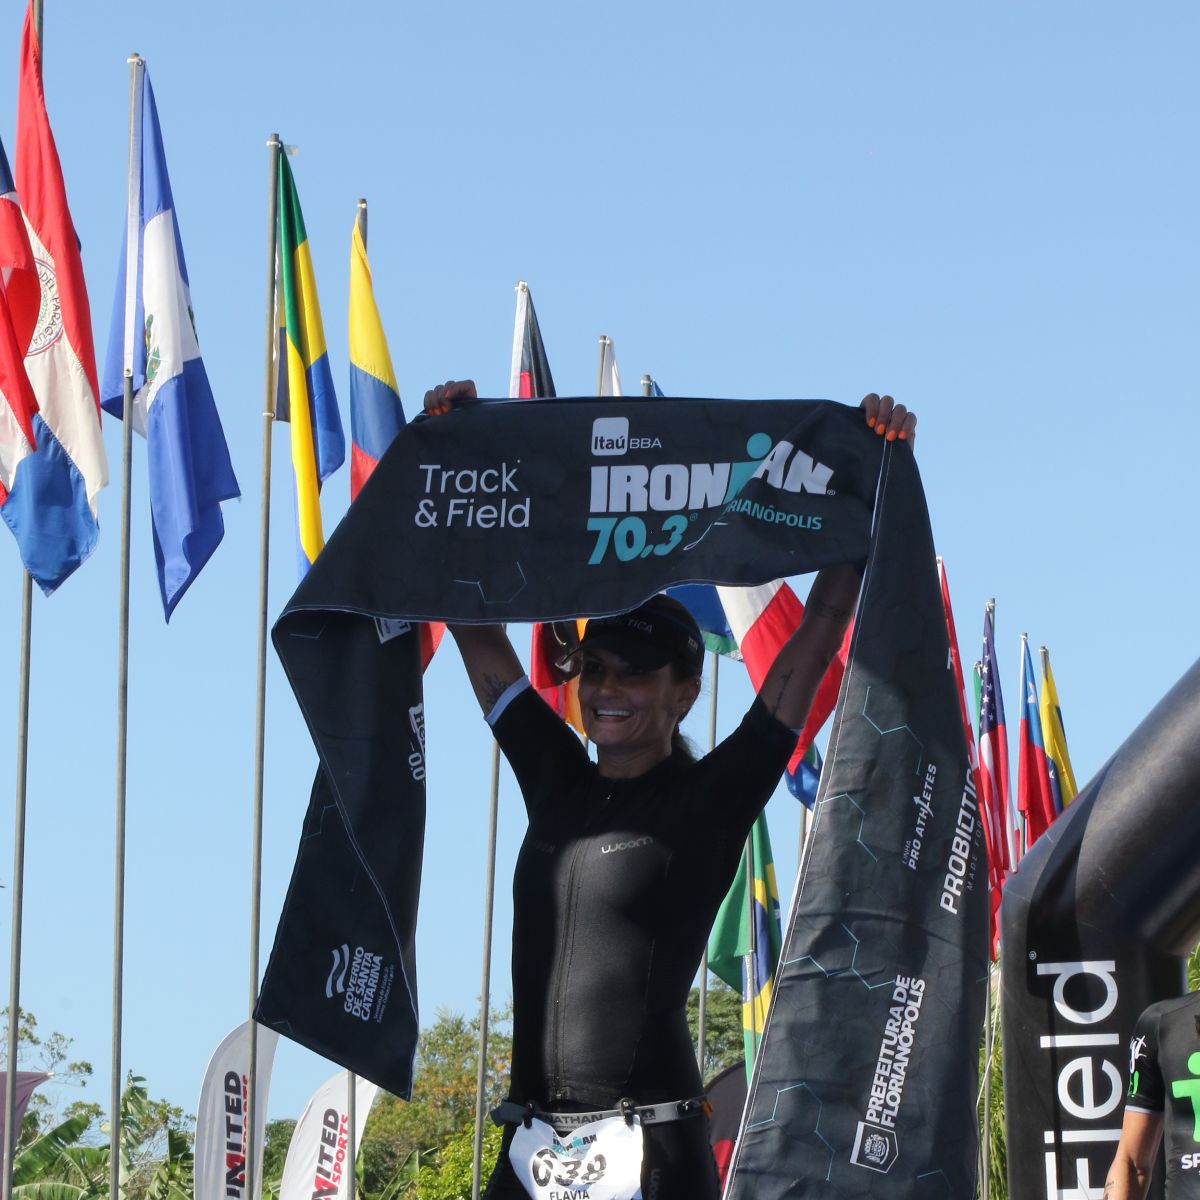 IRONMAN 70.3 Florianopolis - Anything is Possible